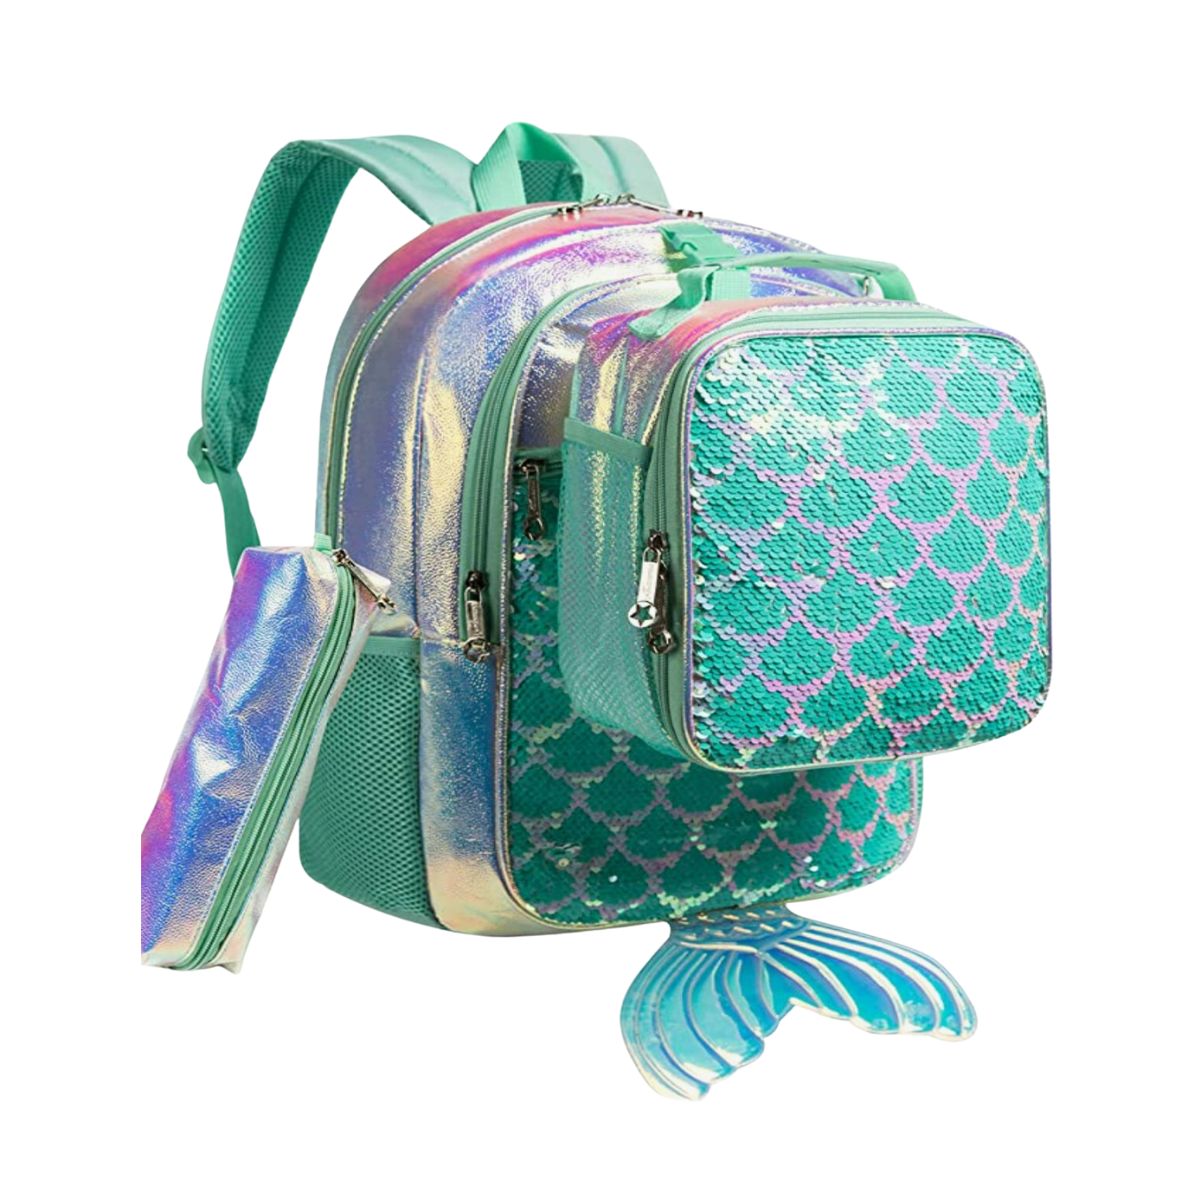 Iridescent child's backpack that looks like a mermaid with a mermaid tail. Sequin lunch box is clipped to the back of the backpack.